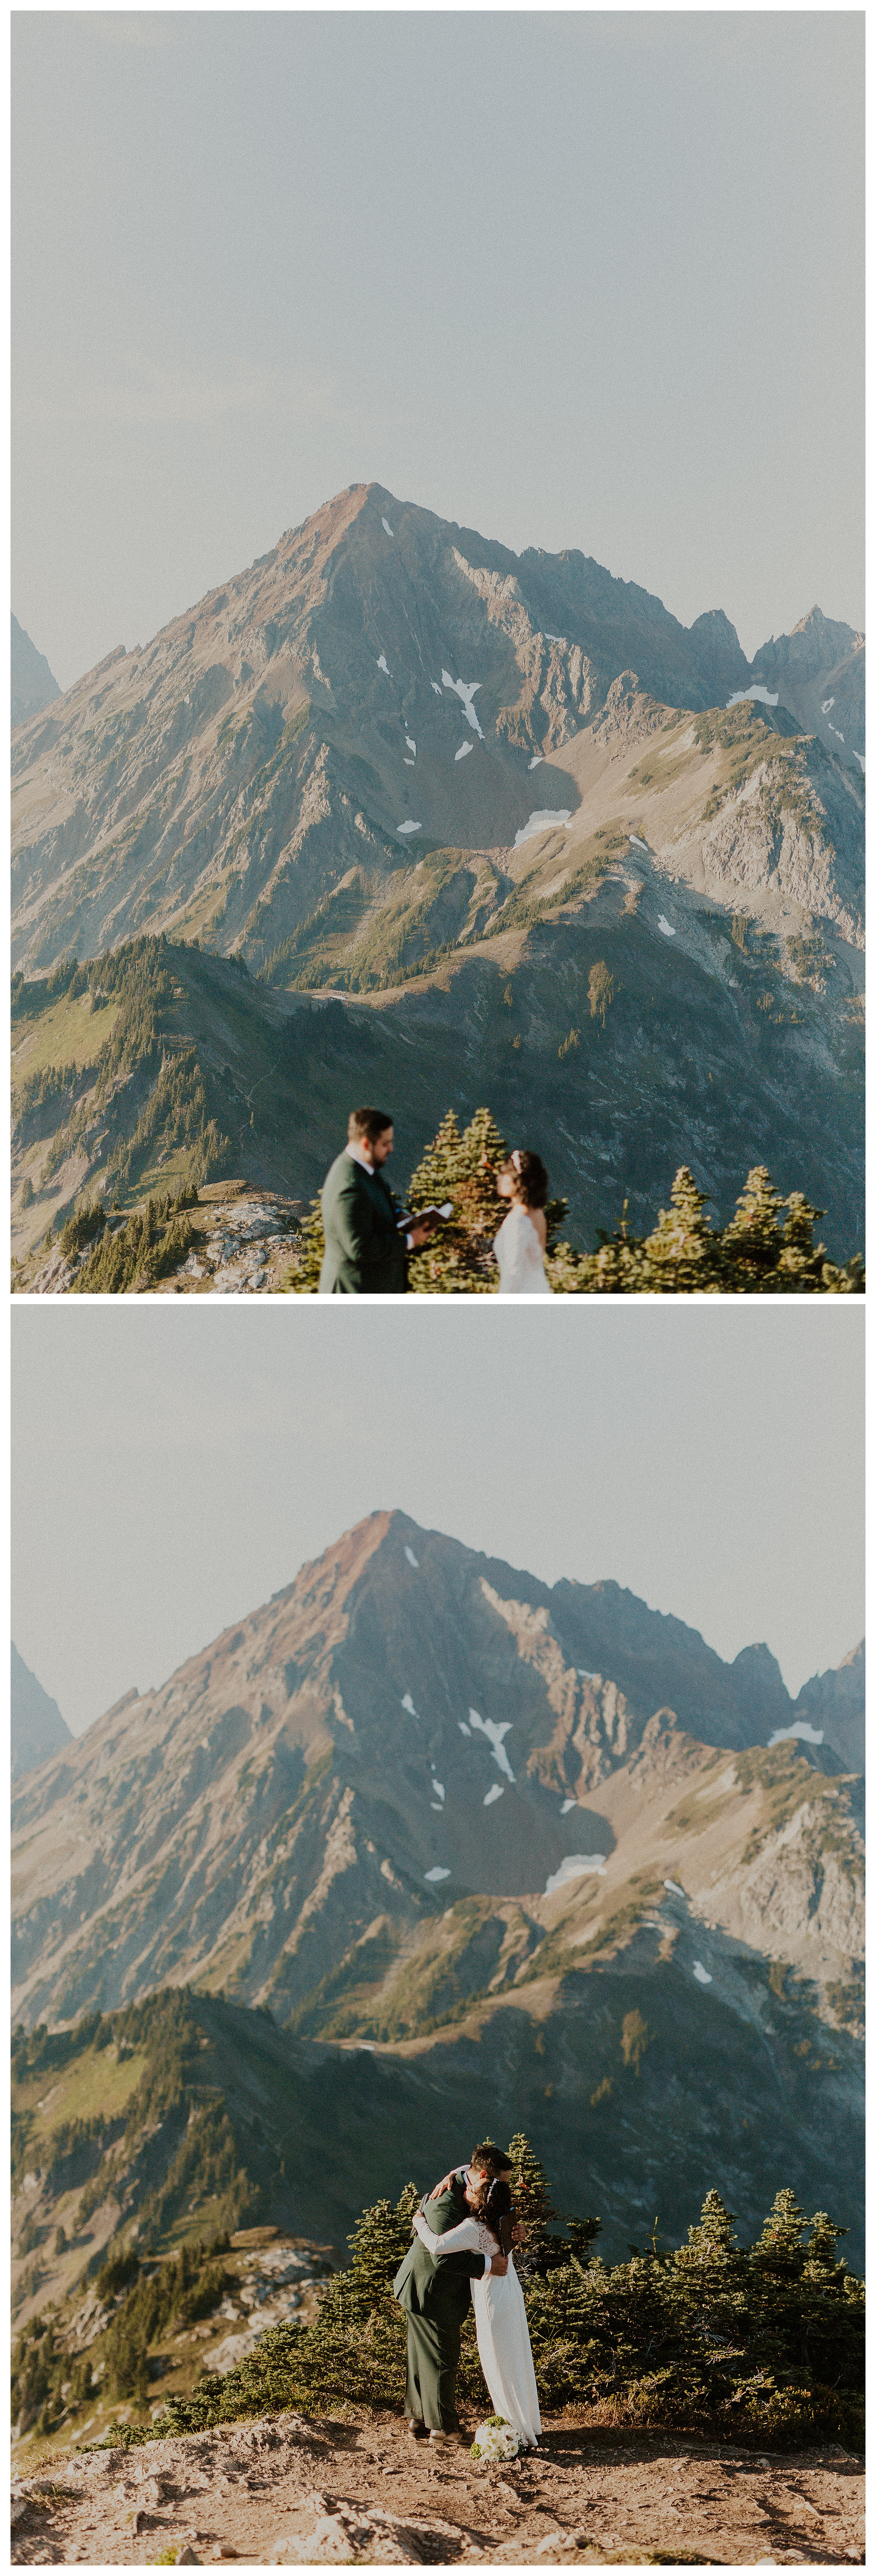 bride and groom reading vows mountain landscape
